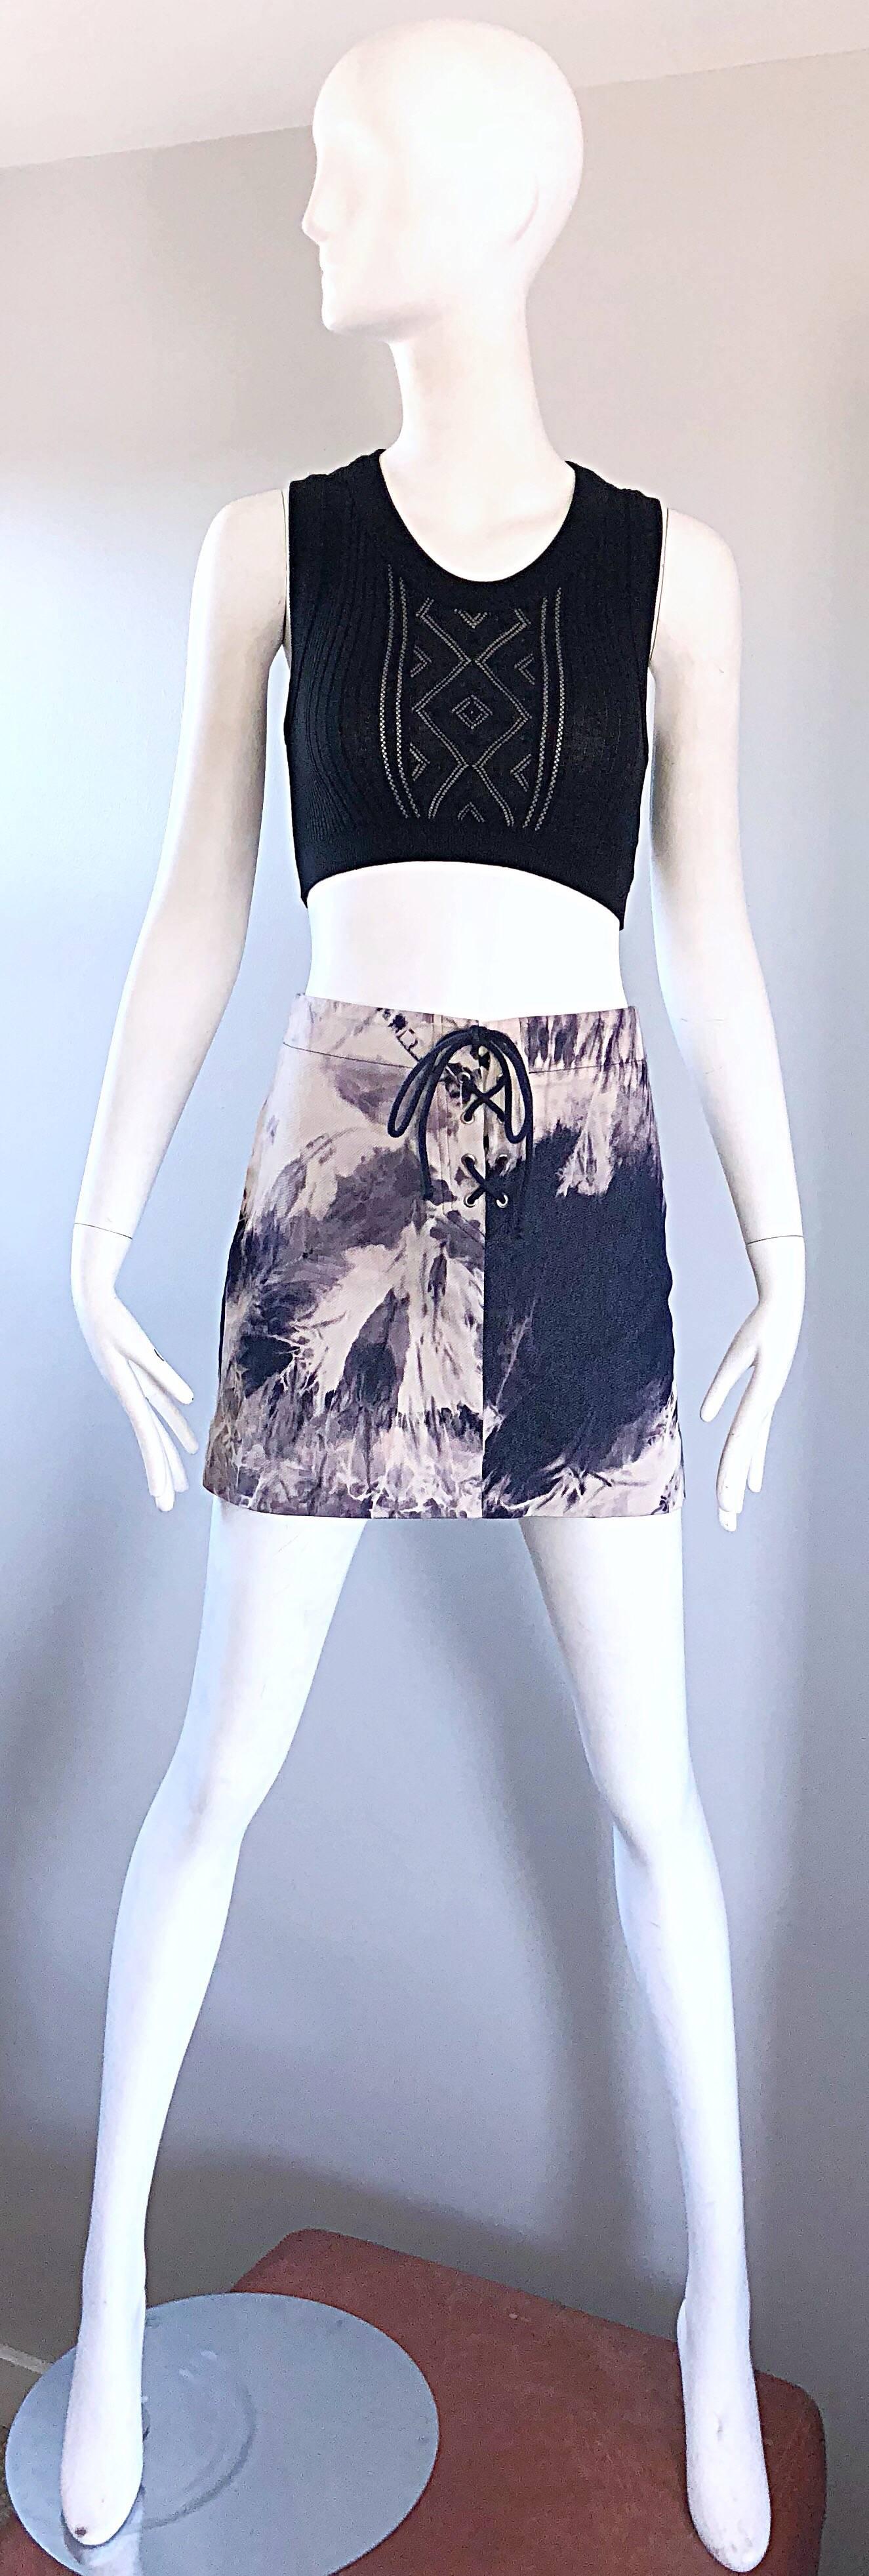 Sexy 1990s CELINE tie dye mini skirt. Navy blue indigo and white allover tie-dye print. Laces up the center front. Great with boots, heels, flats, sandals or wedges. The pictured vintage Jean Paul Gaultier black crop top is also available in my